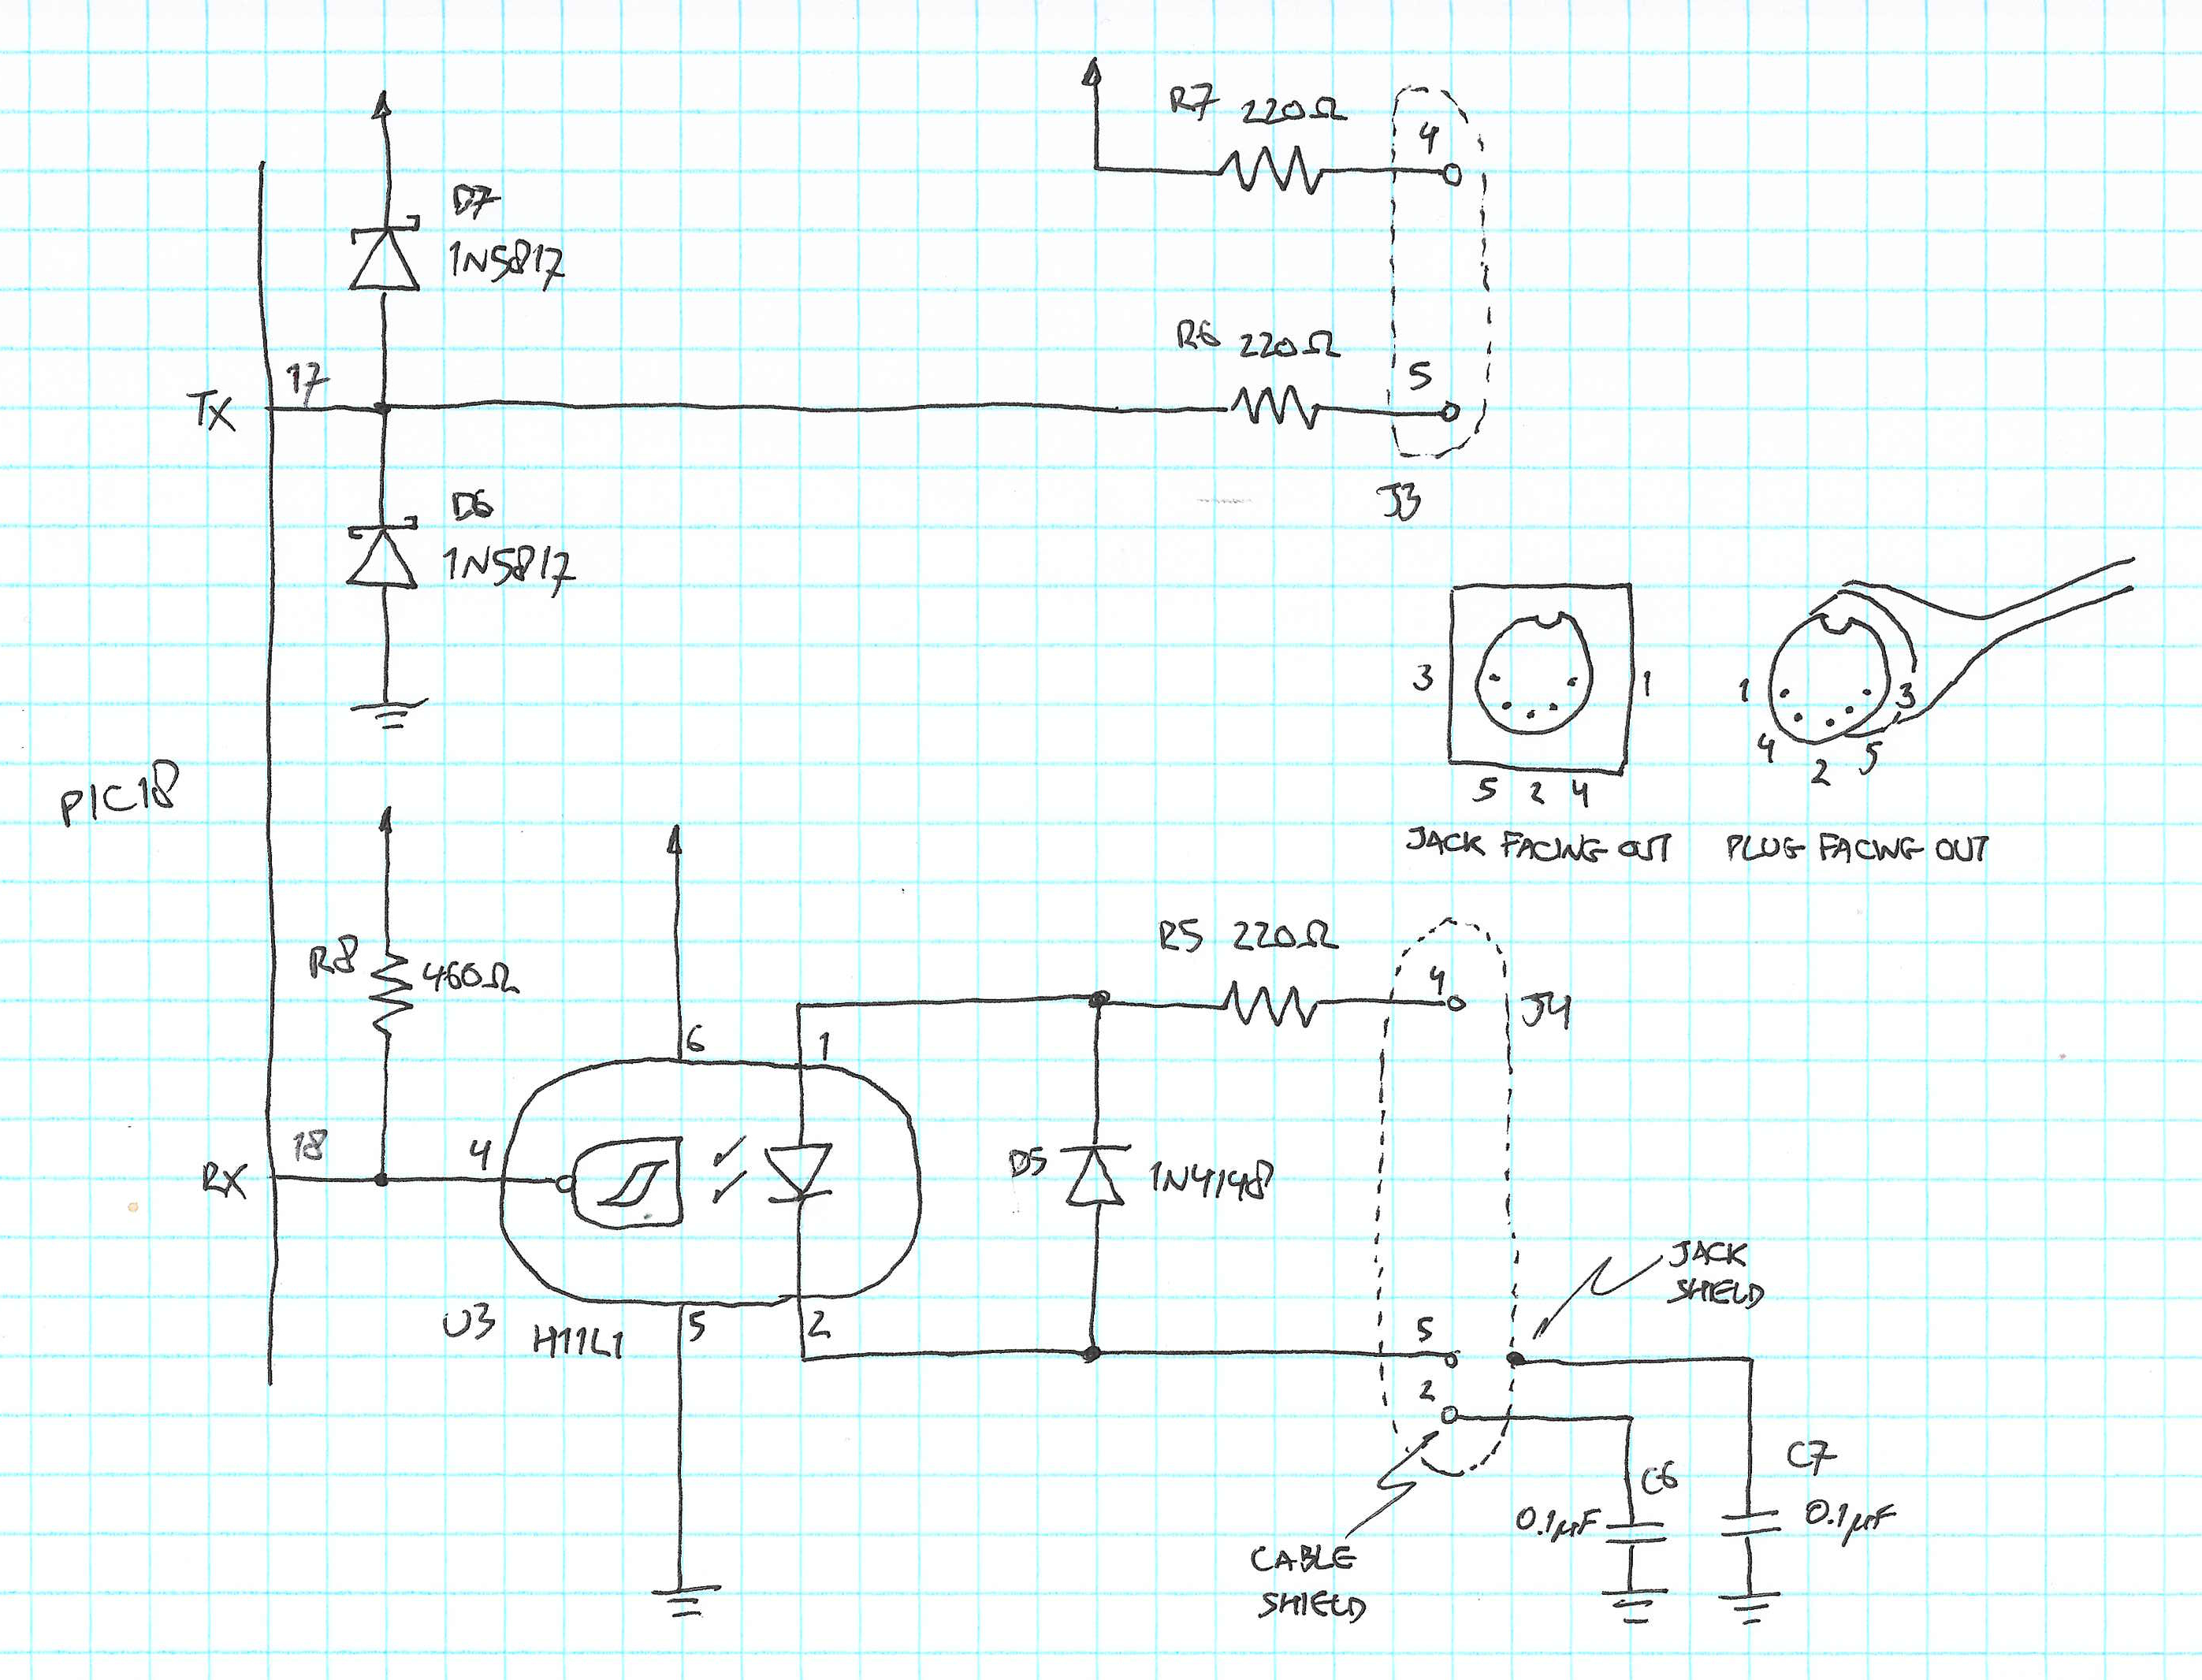 Breadboard-based prototype receive/transmit circuit electrical schematic